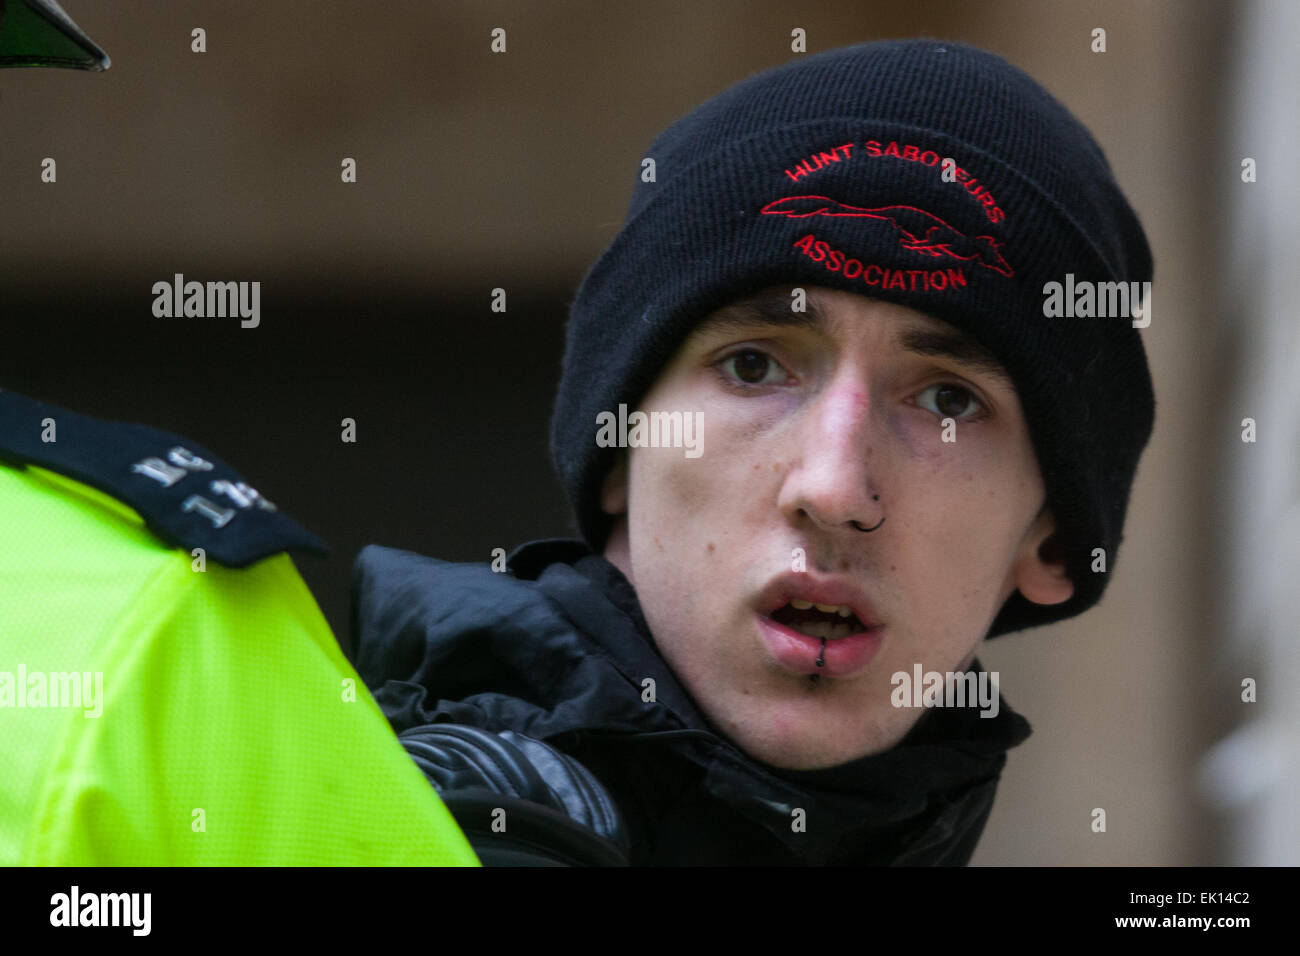 Whitehall, London, April 4th 2015. As PEGIDA UK holds a poorly attended rally on Whitehall, scores of police are called in to contain counter protesters from various London anti-fascist movements. PICTURED: Wearing a hunt saboteurs hat, a young anti-fascist counter-protester stares into the camera as he is arrested after attempting to break through police lines into the PEGIDA rally. Credit:  Paul Davey/Alamy Live News Stock Photo